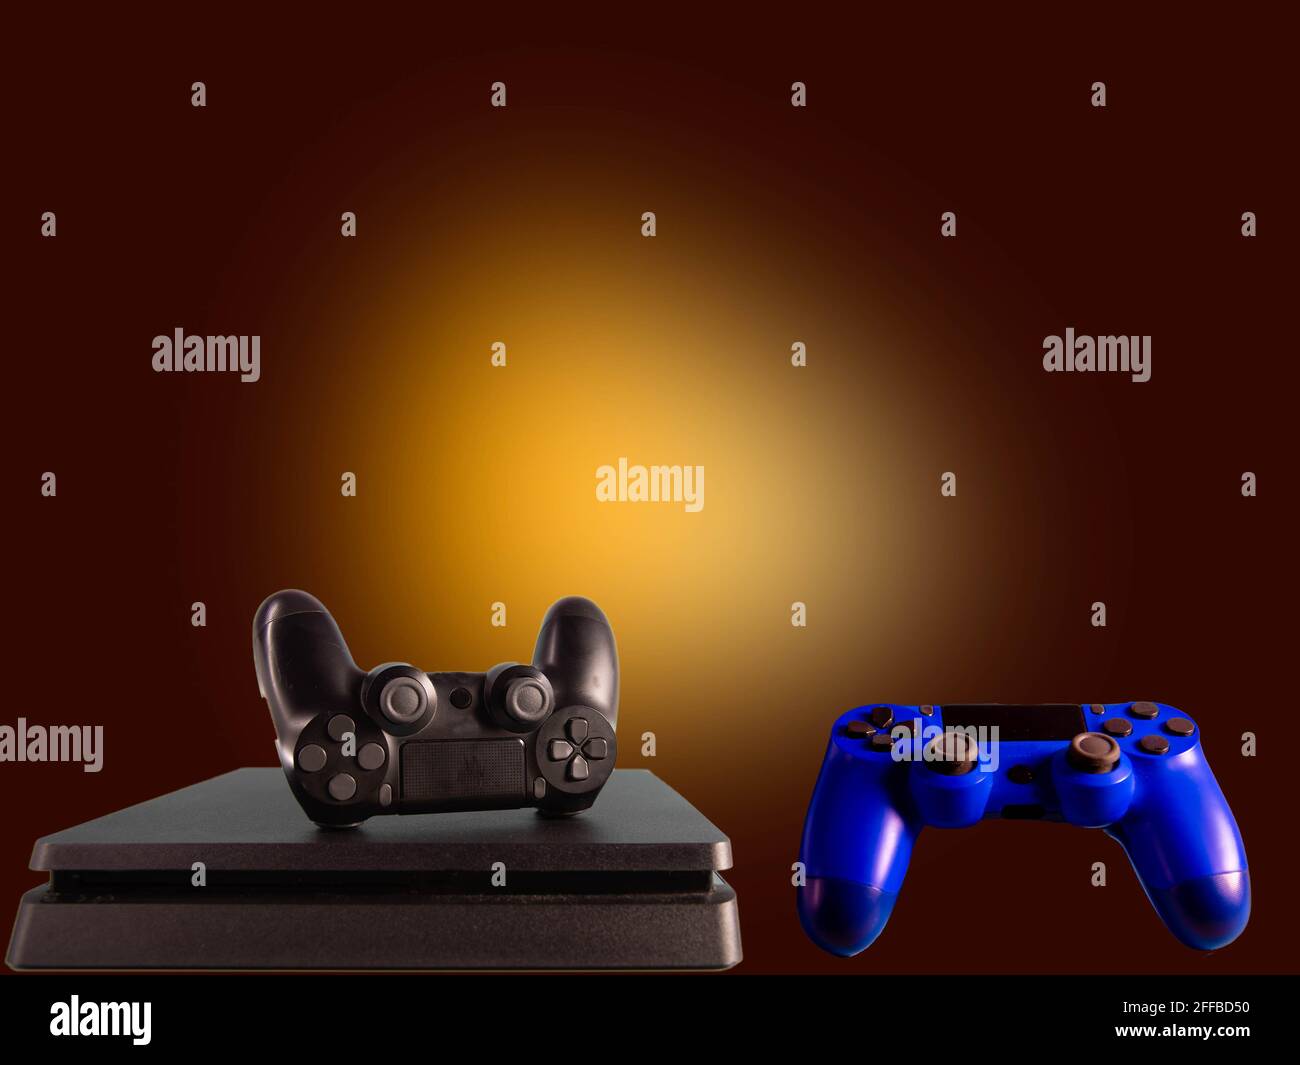 Video game controls on the dark background. Electronic game accessories. State-of-the-art controllers. Gamer commands. Electronic objects. Stock Photo